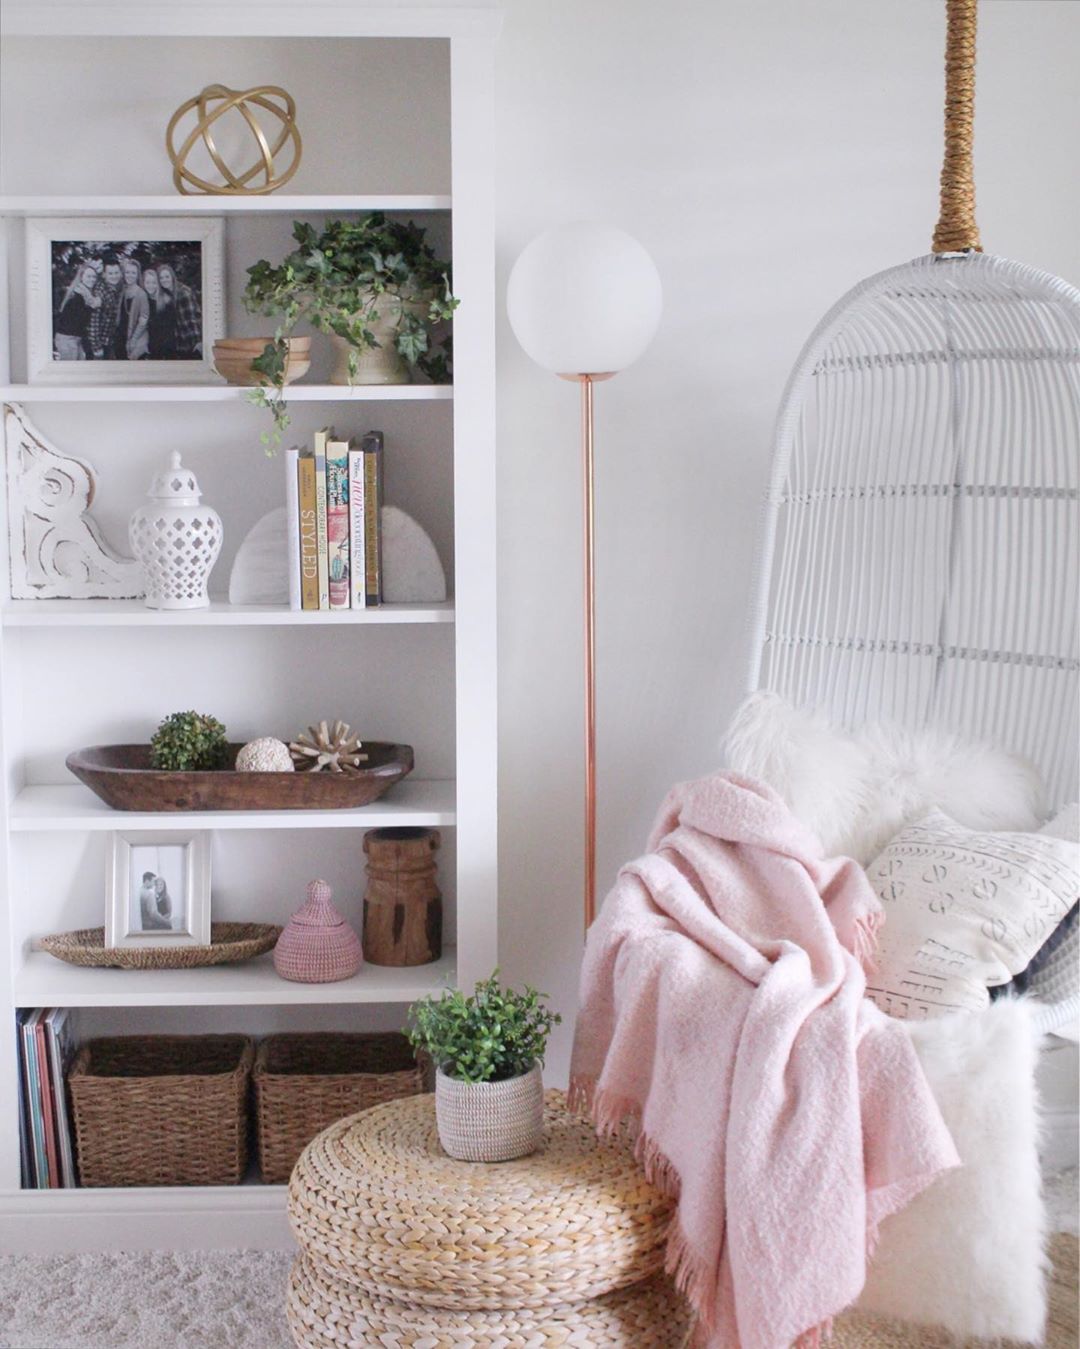 Cozy Reading Nook with a Hanging Basket Chair Next to a Bookshelf. 